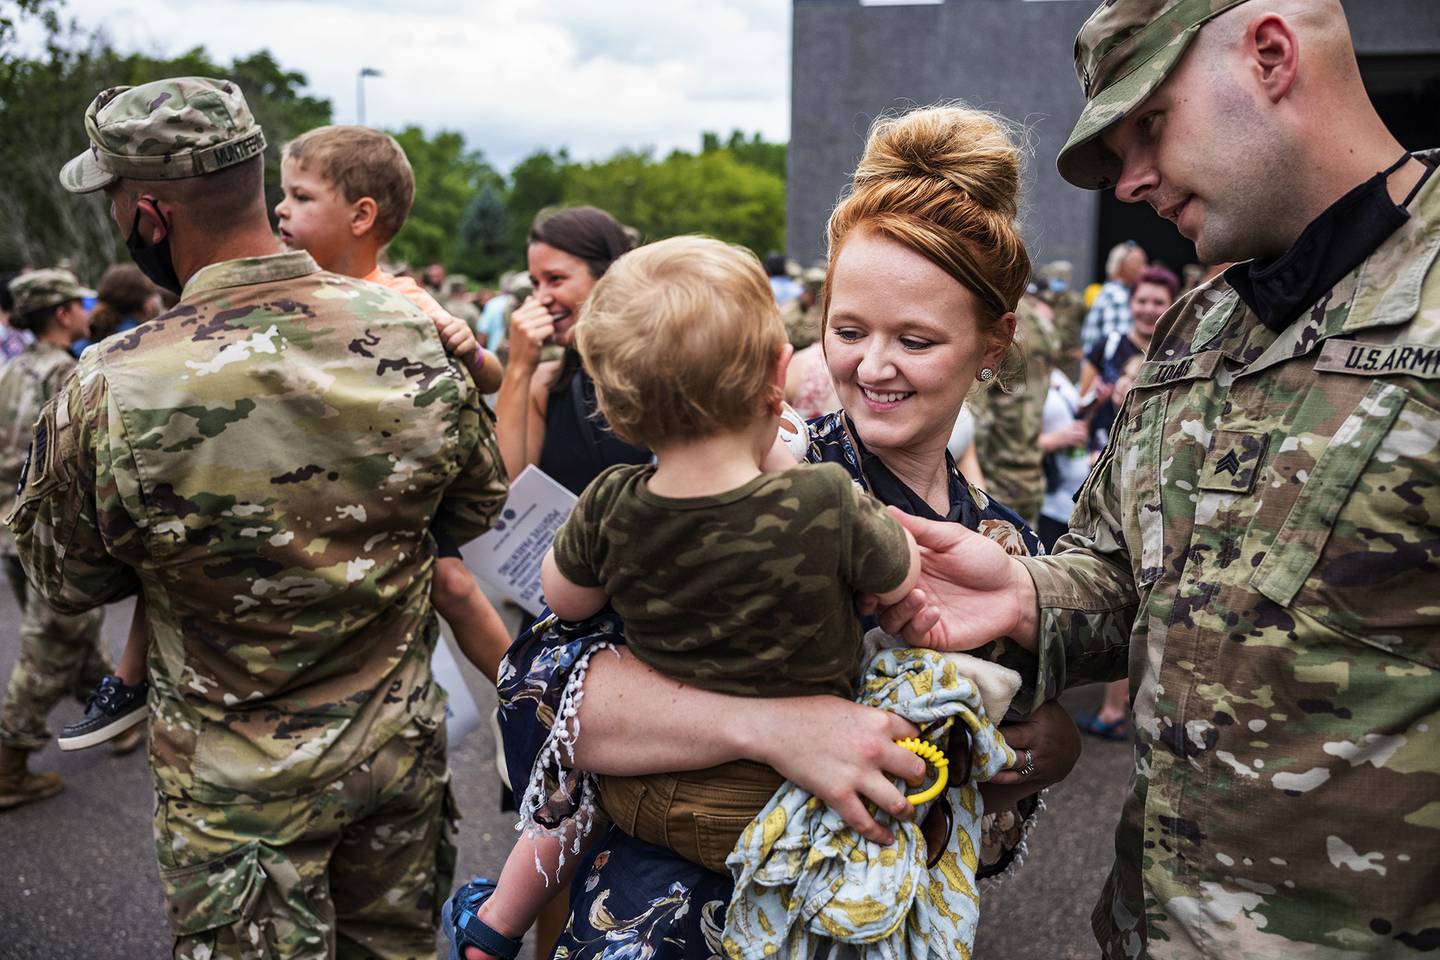 Sgt. Alex Tokar says goodbye to his wife Brittney and son Nolan, 2, Sunday, Aug. 9, 2020, before a year-long deployment to Naval Station Guantanamo Bay in support of Joint Task Force Guantanamo to provide base security.